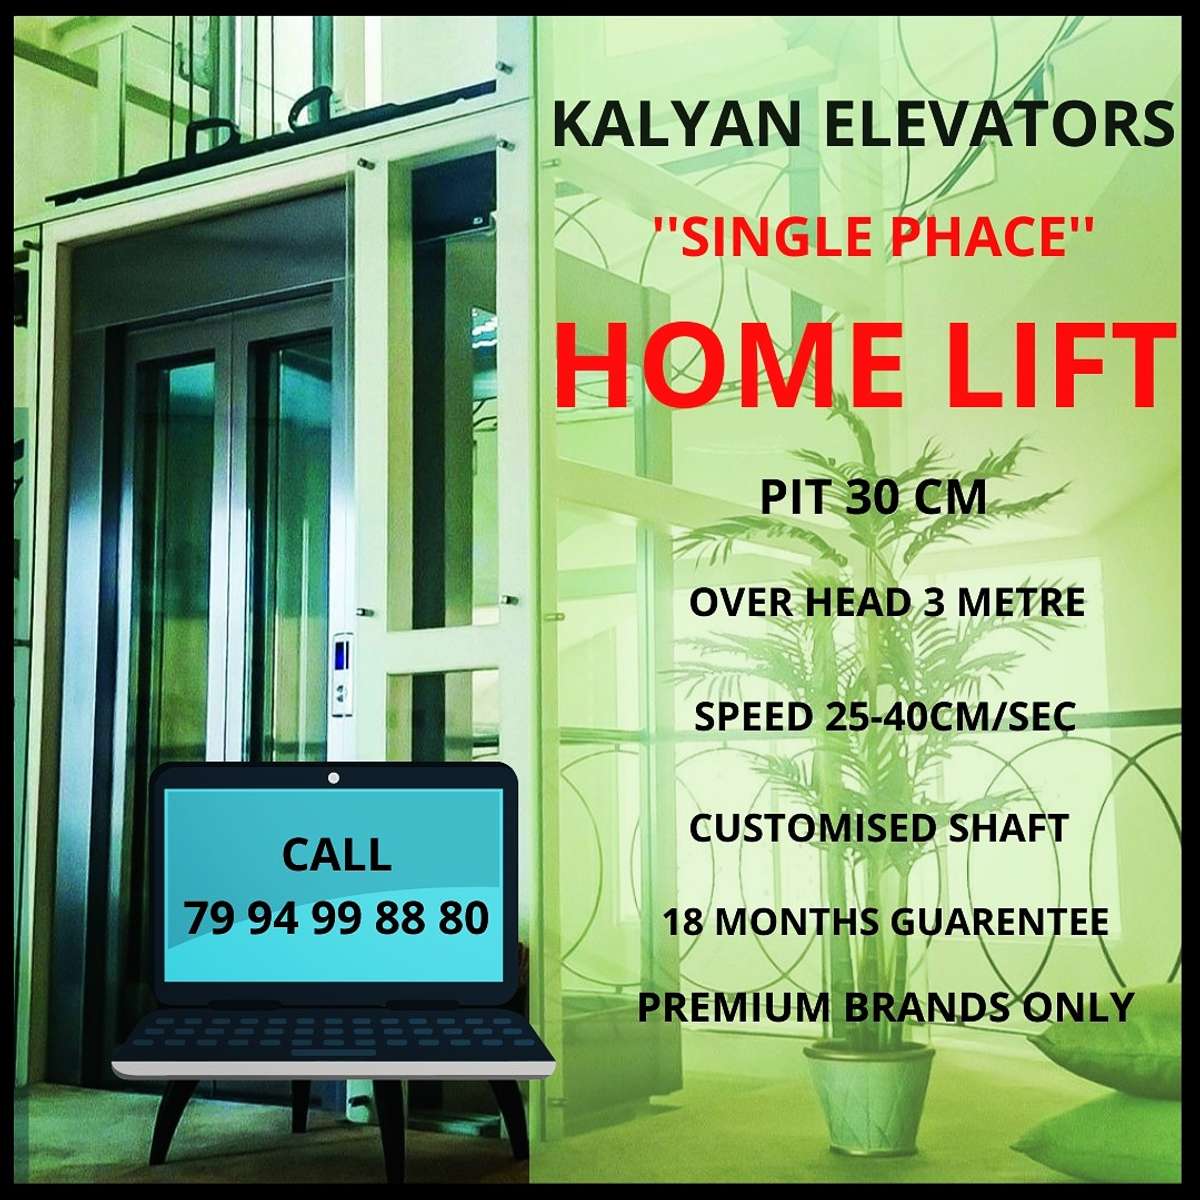 ##Kalyan Elevators offers the long-awaited solution to vertical mobility within homes at affordable prices and easy-to-use features. Our customized and aesthetically designed home lifts are easily installable in preexisting homes as well as houses under construction, and help you relieve the headache of climbing. More details: